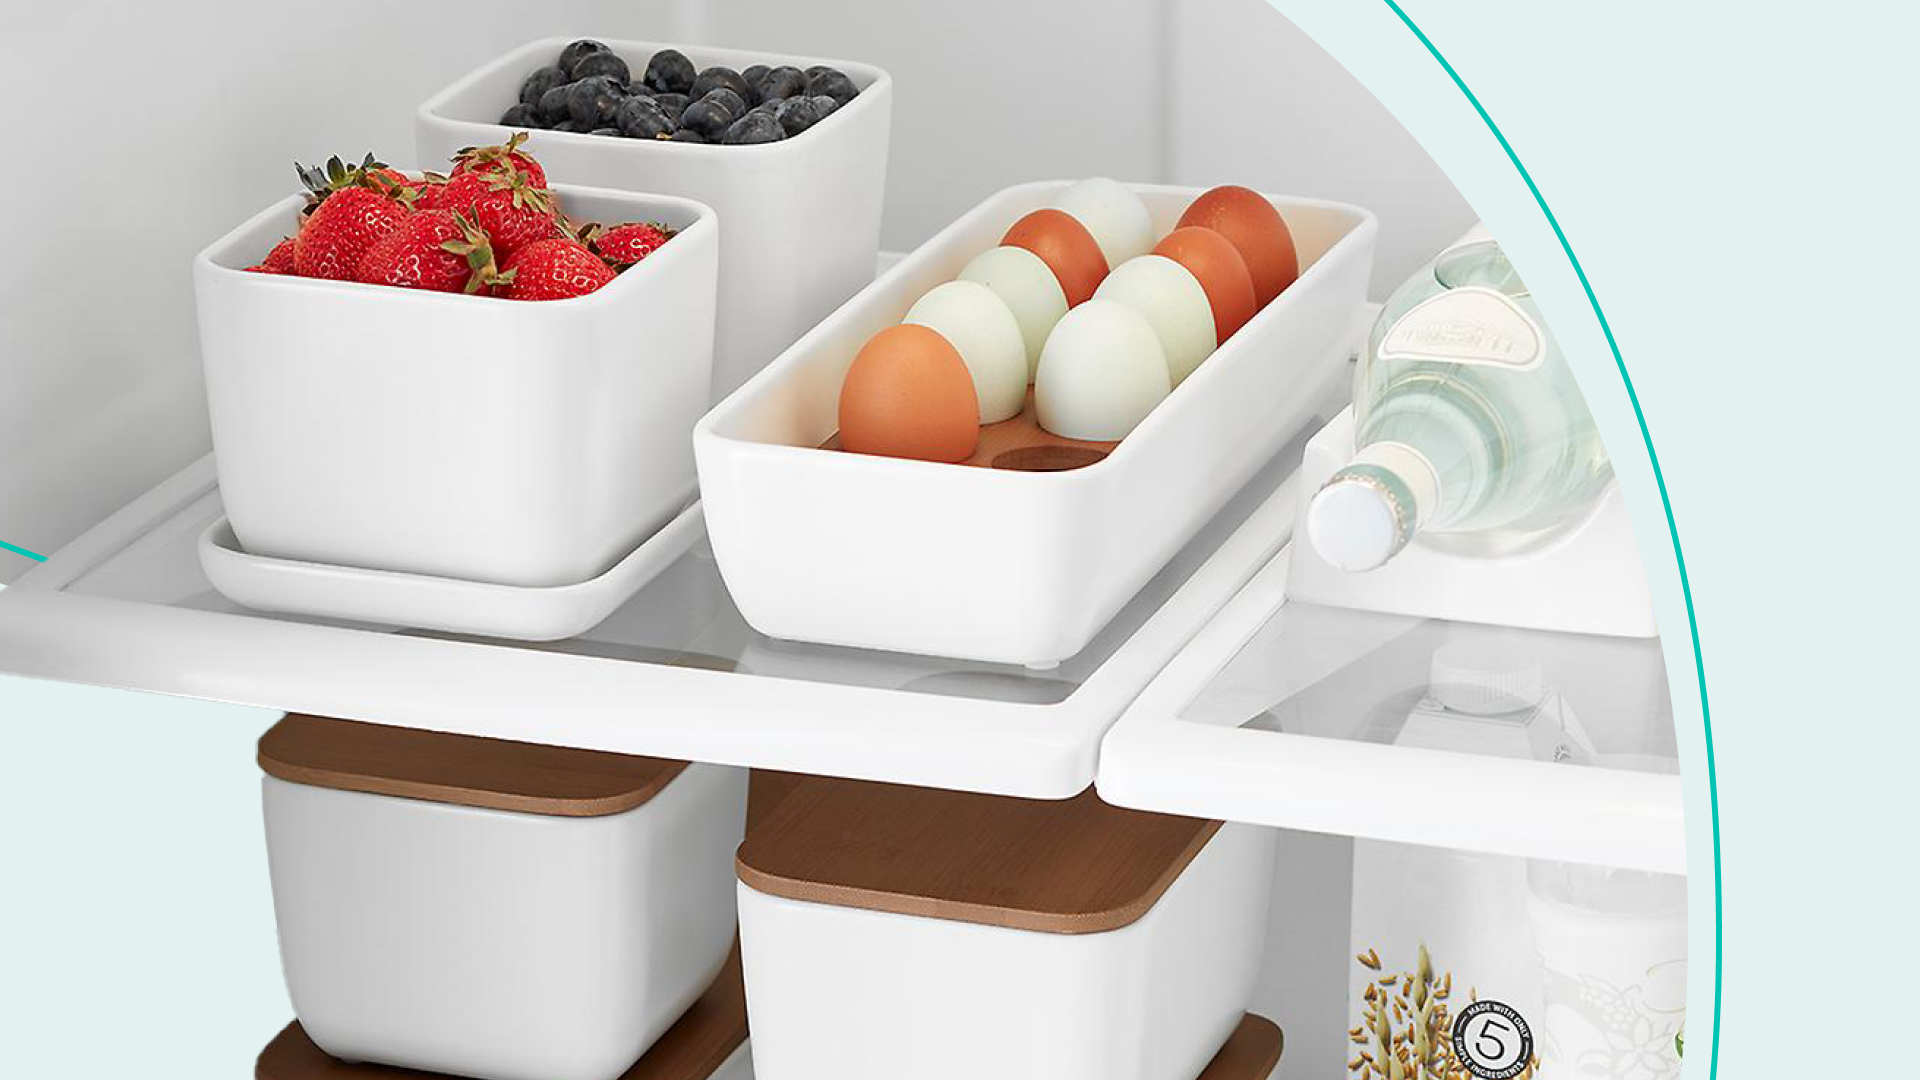 Fridge Organization on the Agenda? Here Are the Best Fridge Organizer Bins  and Drawers to Get the Job Done.